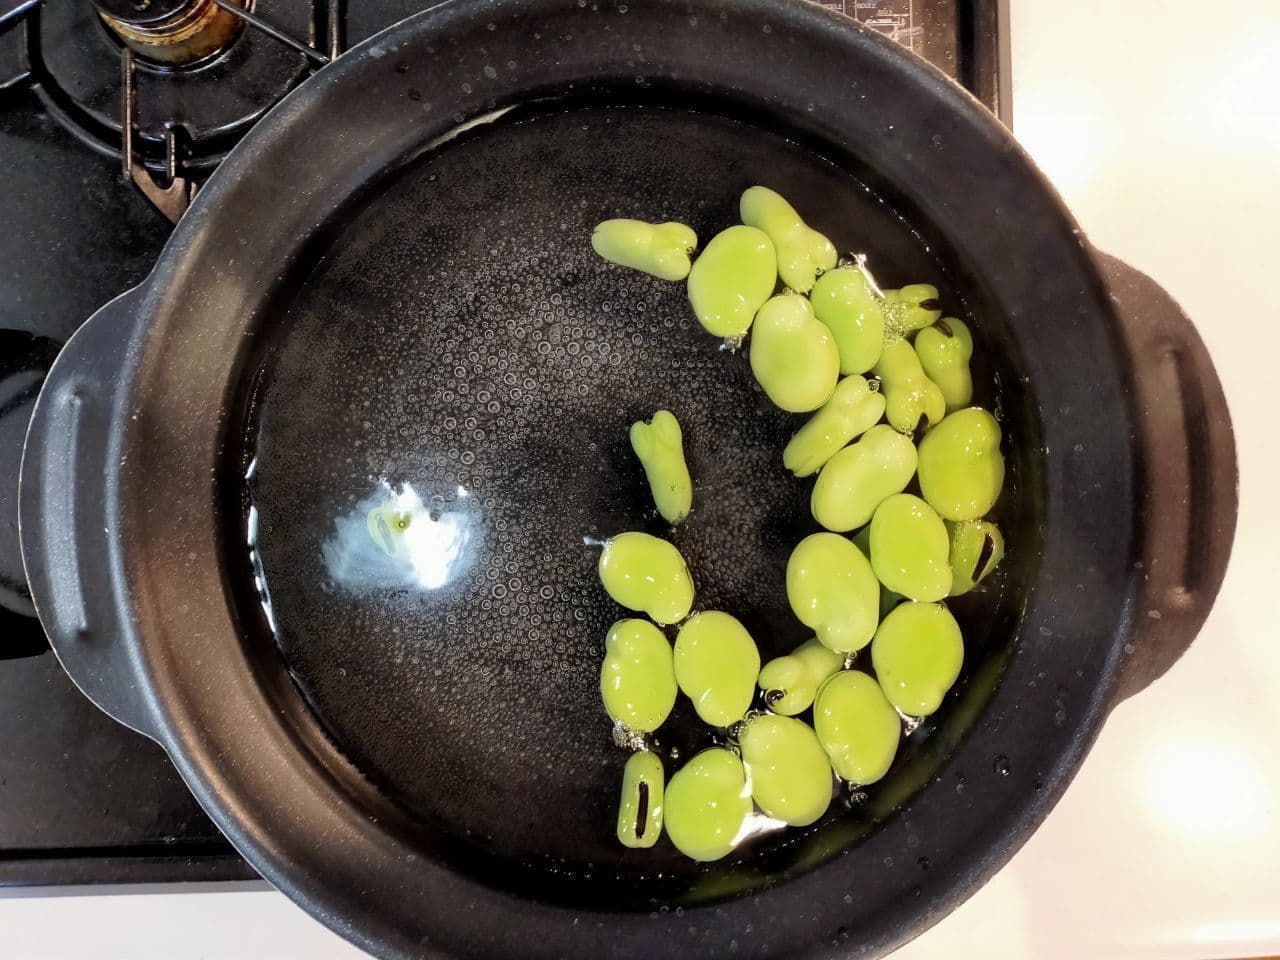 Step 3: Preparing and boiling fava beans